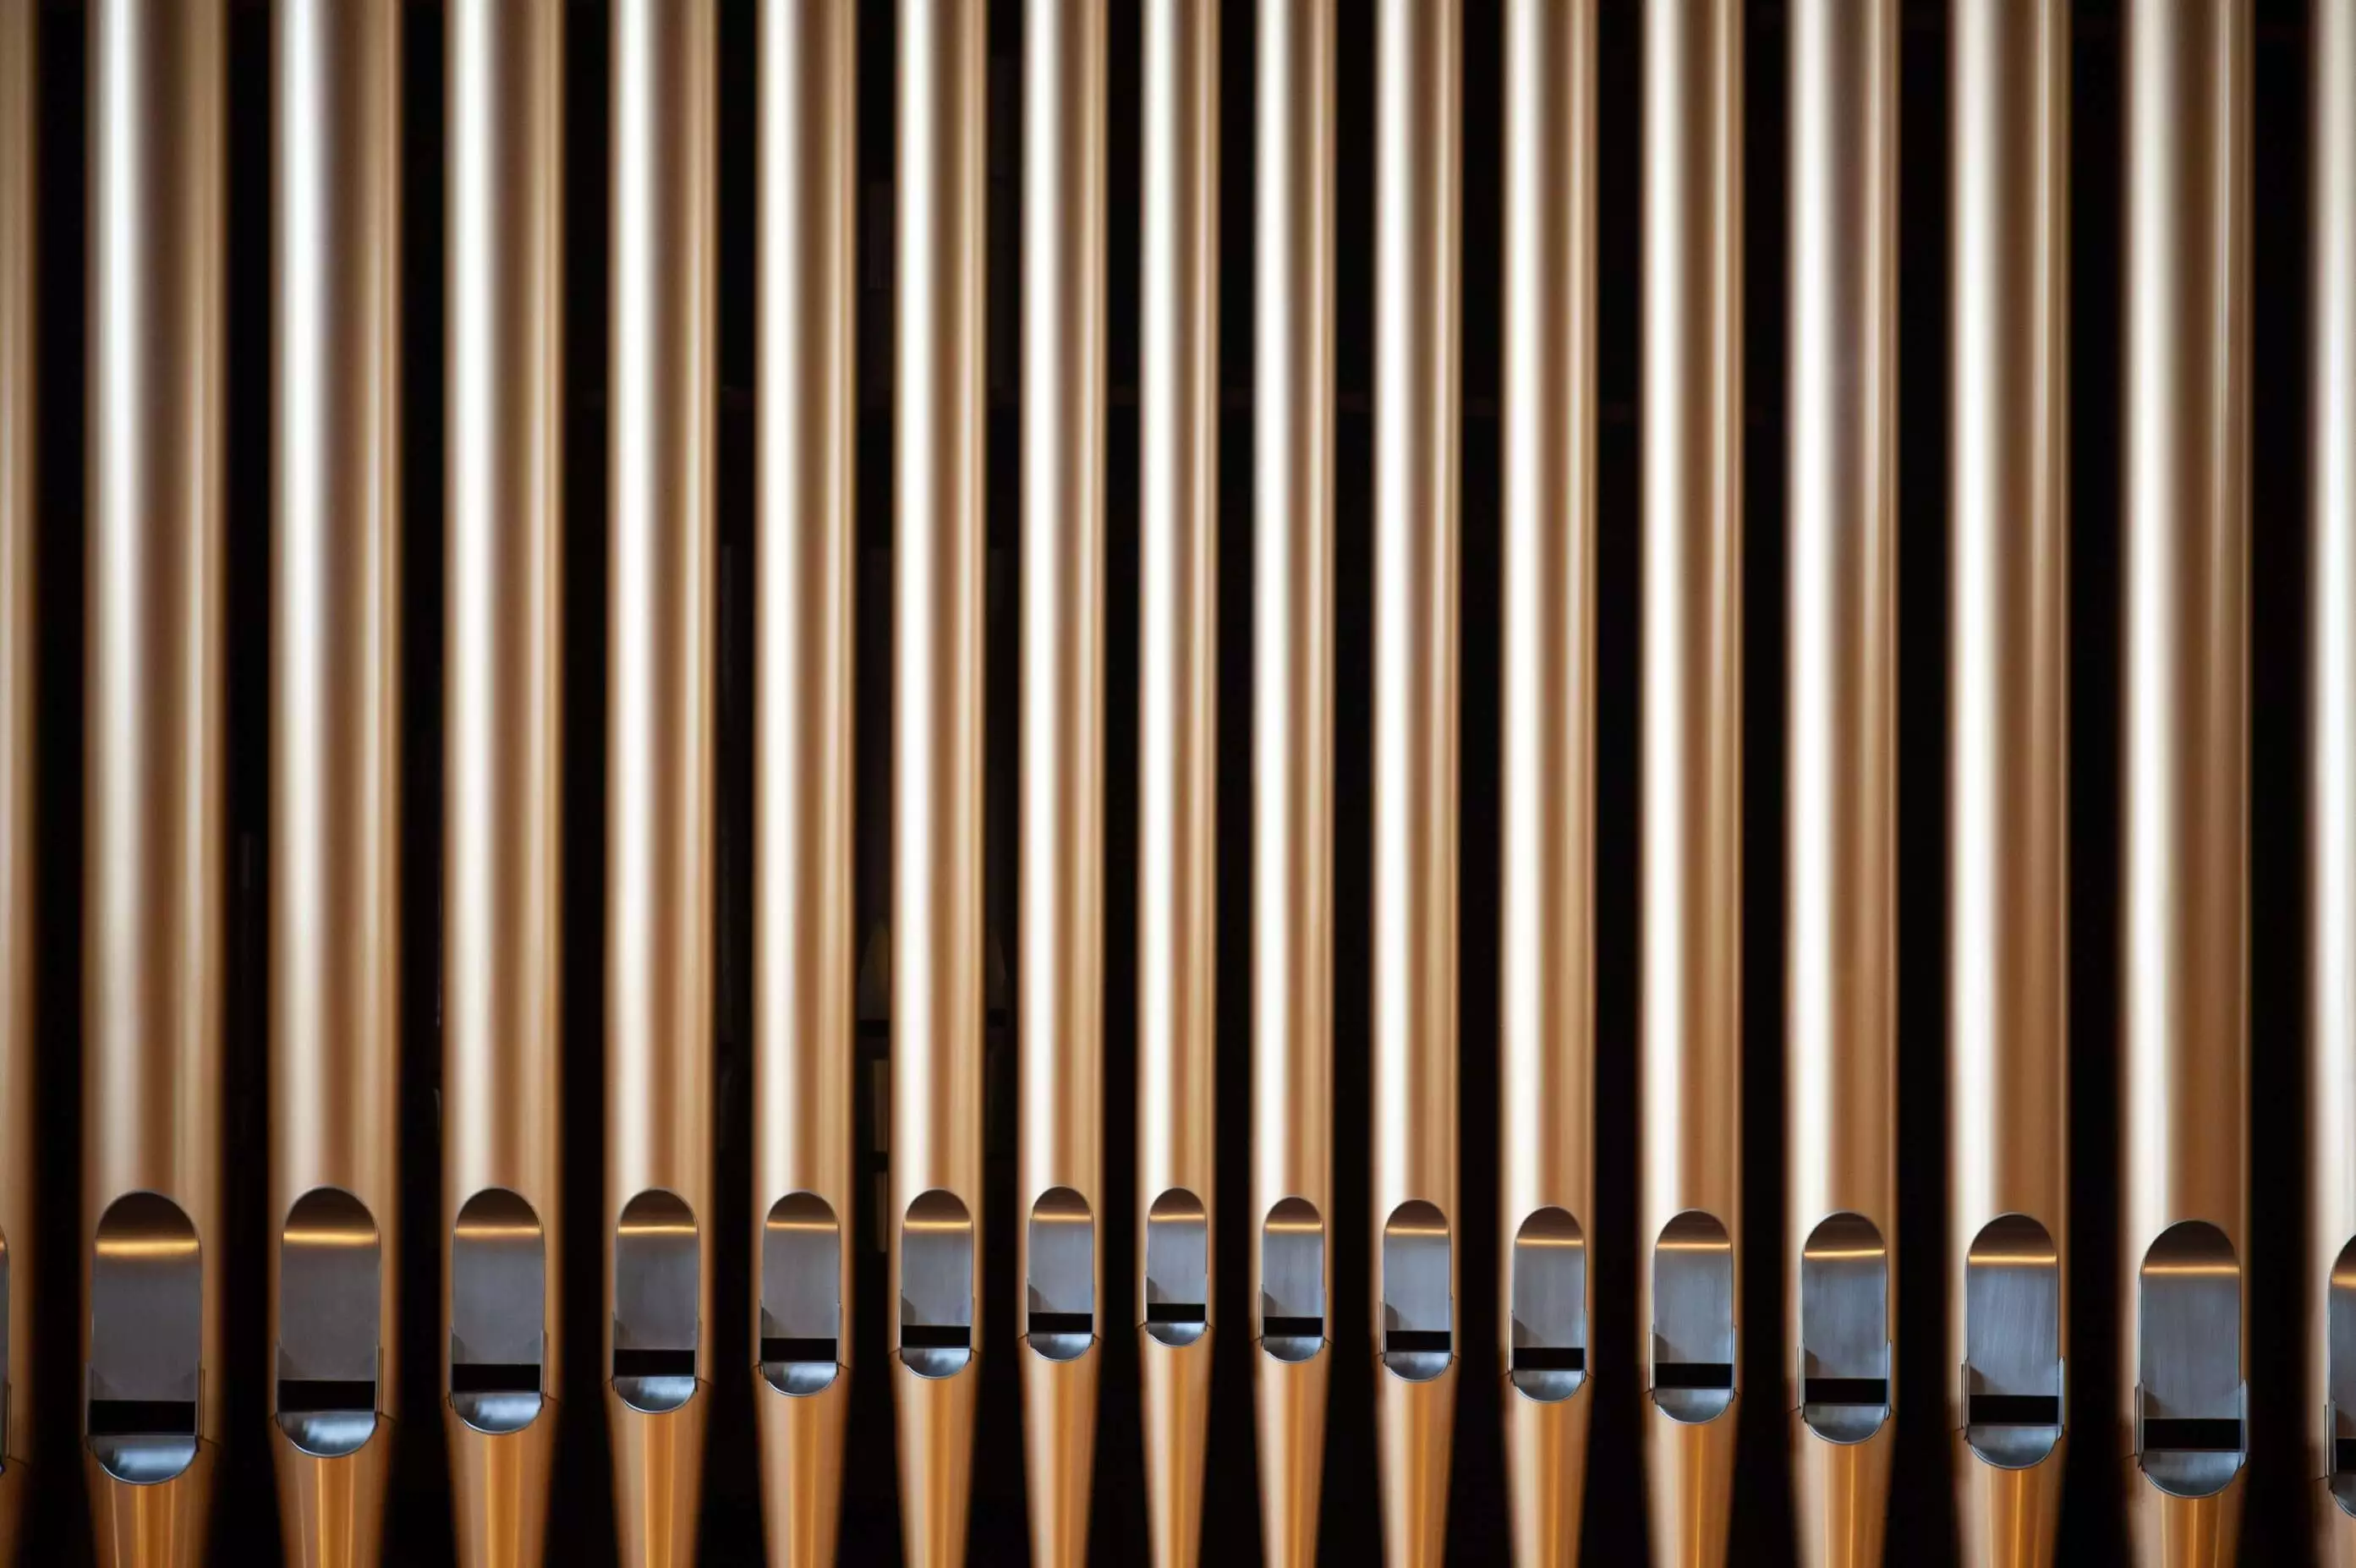 Organ pipes in a row